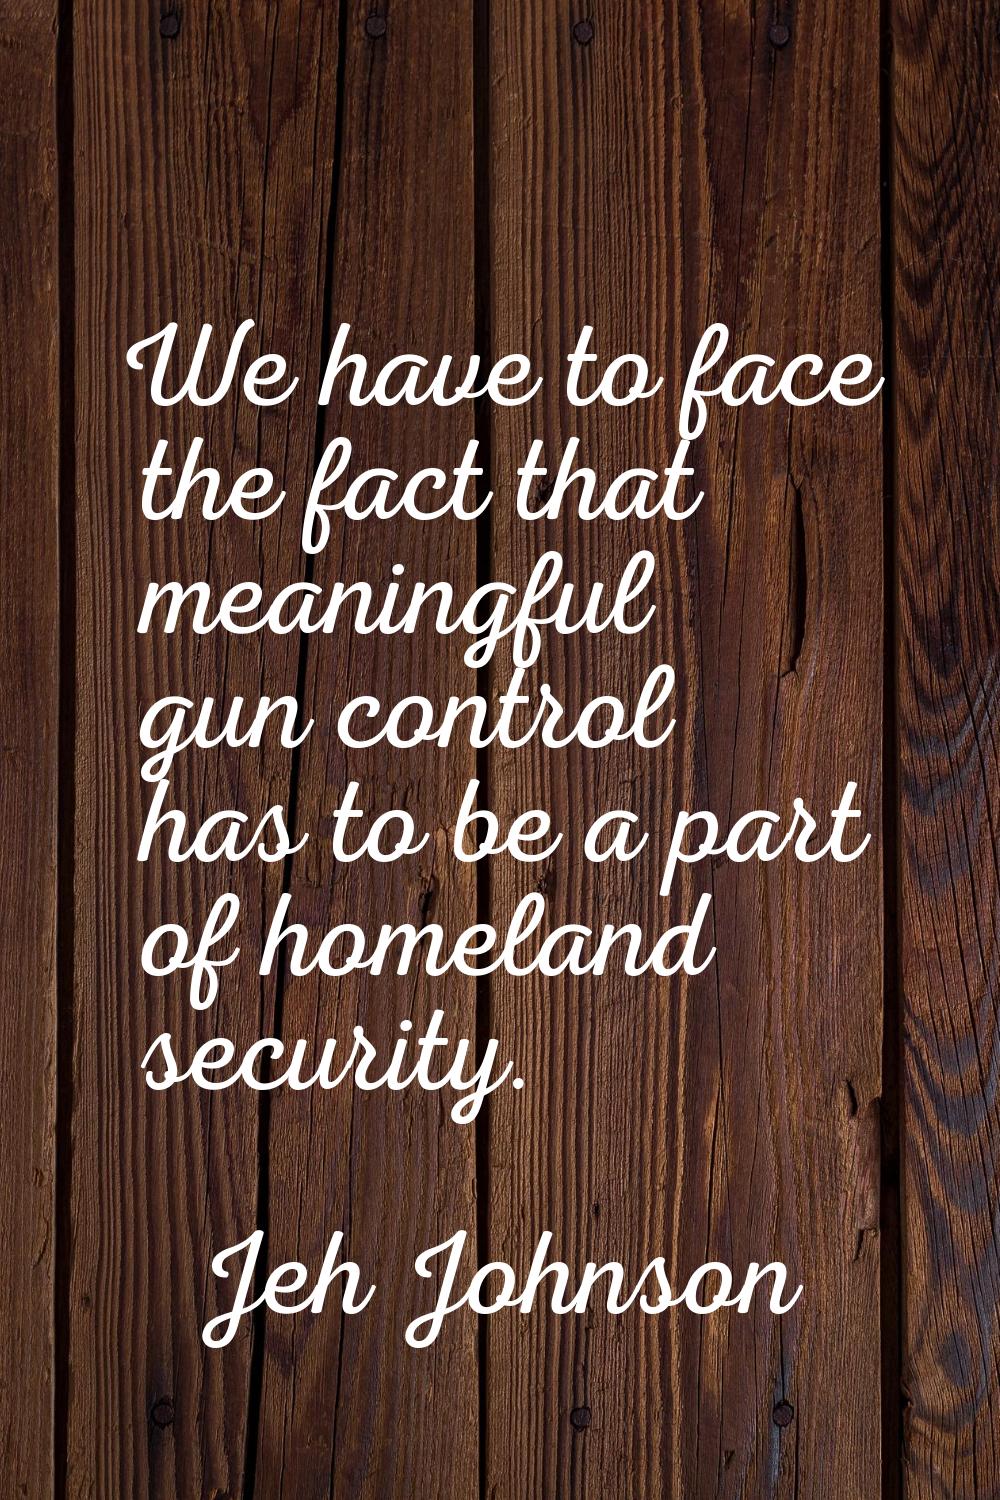 We have to face the fact that meaningful gun control has to be a part of homeland security.